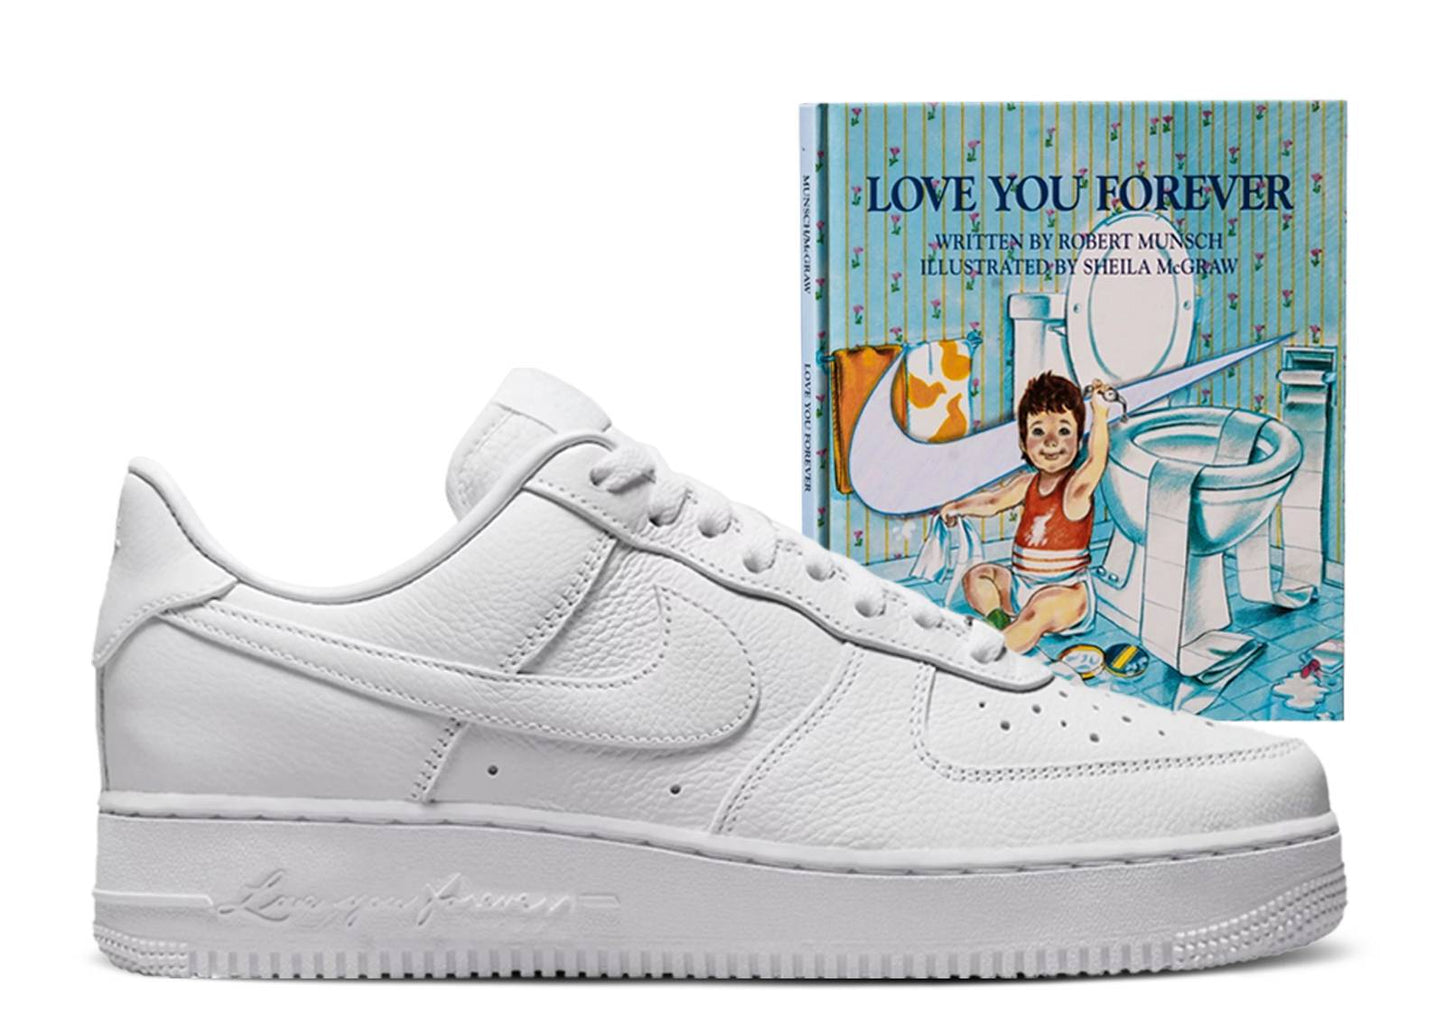 NOCTA x Air Force 1 Low Certified Lover Boy With Love You Forever Book